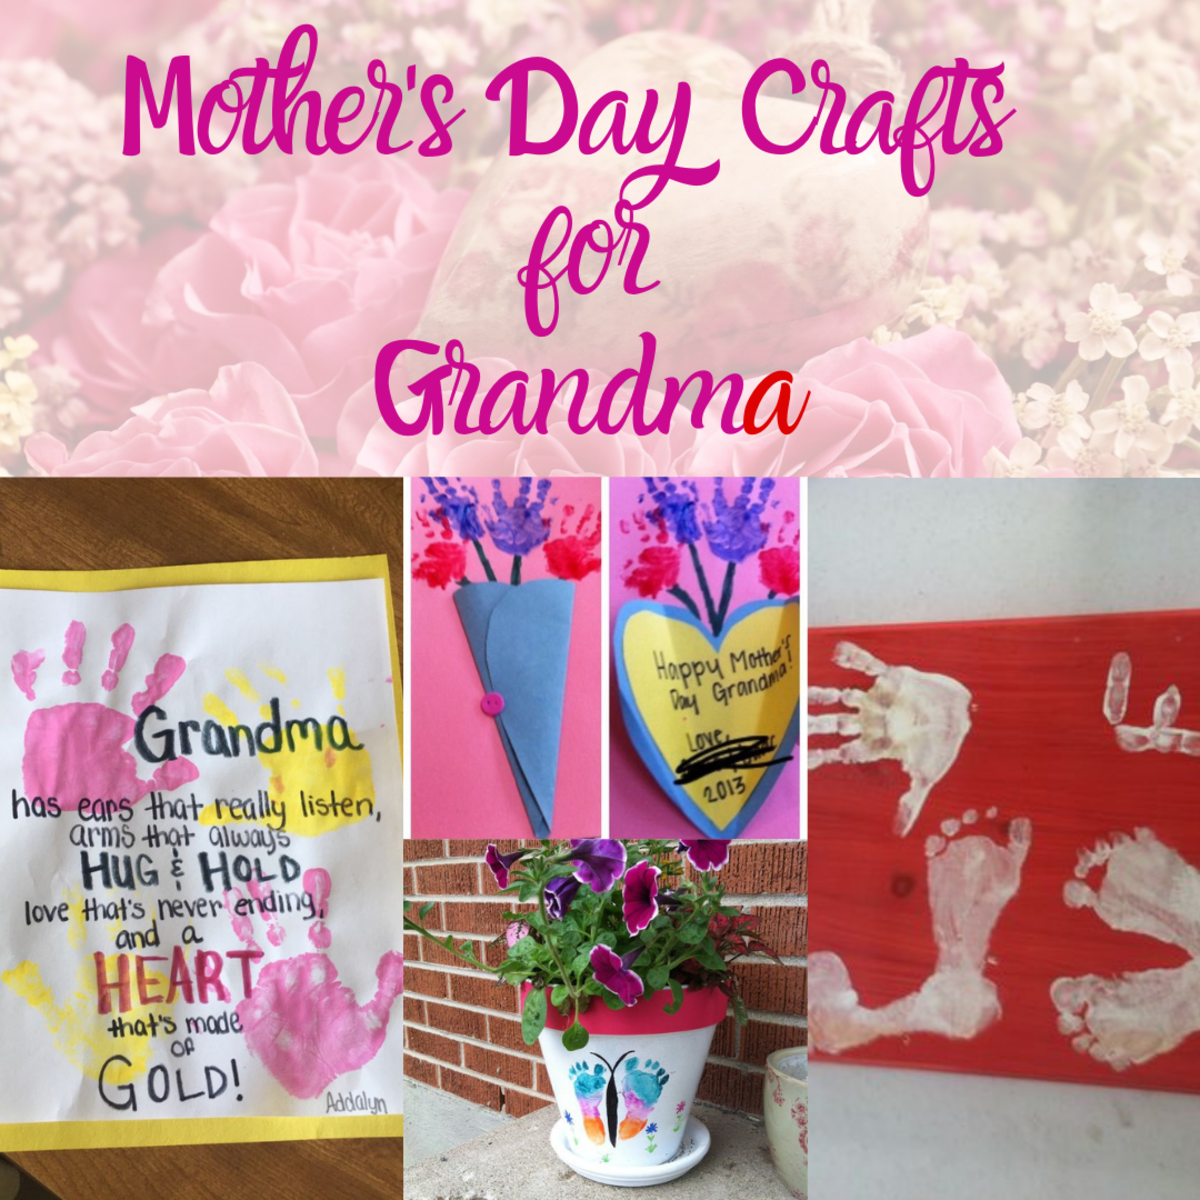 30+ Adorable DIY Mothers Day Crafts for Grandma that show her she is hands down the best